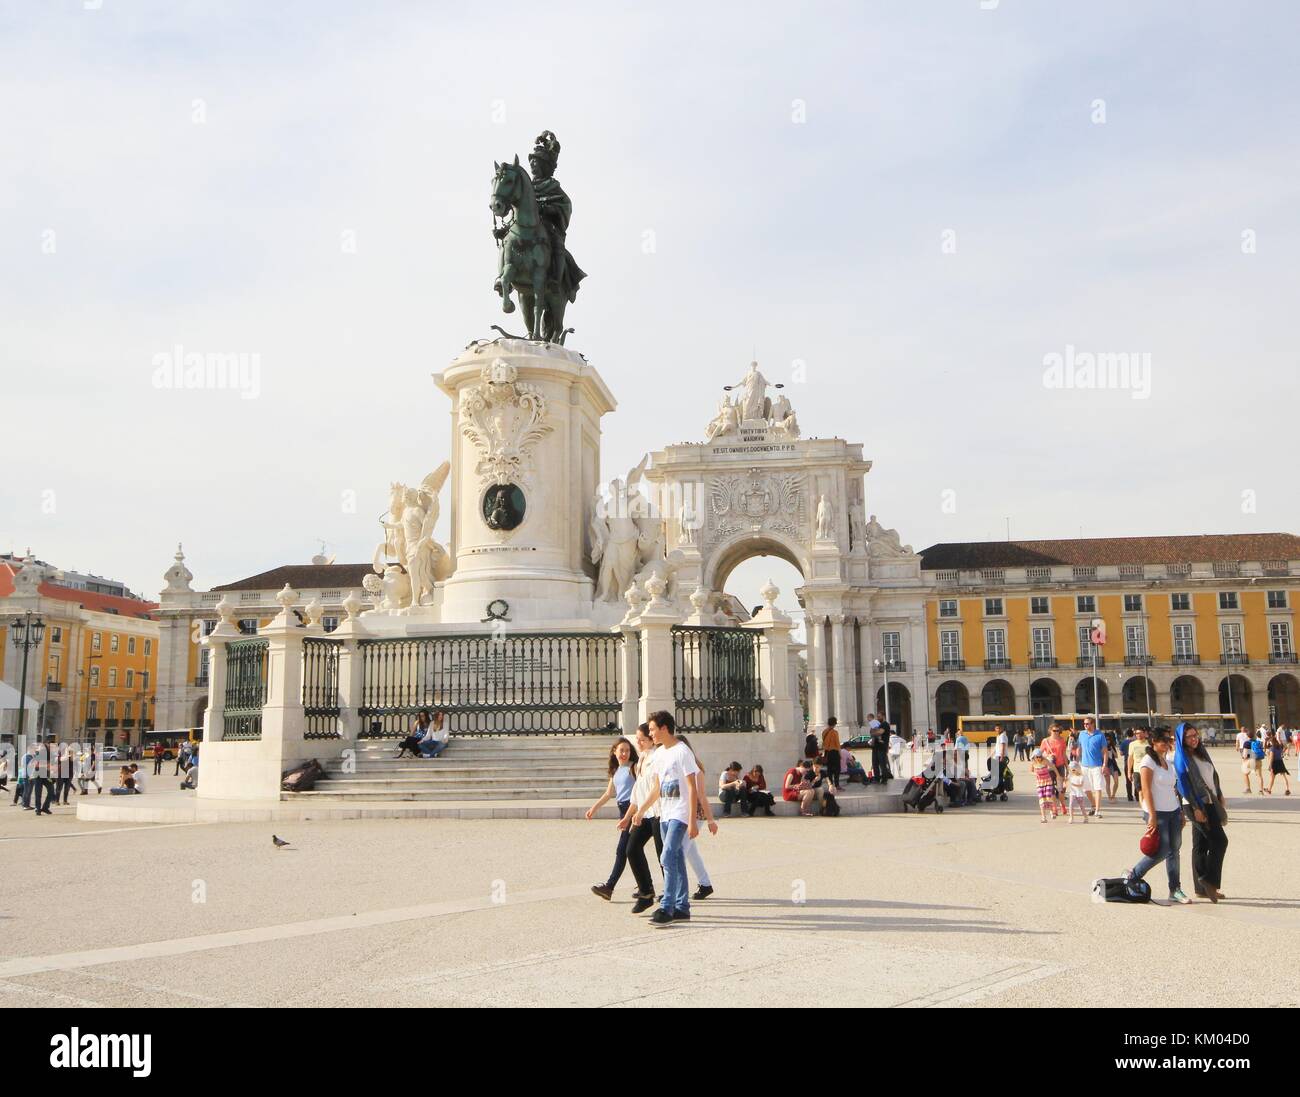 Praca Do Comercio or Commerce Square and Statue of King José I in Lisbon, Portugal Stock Photo